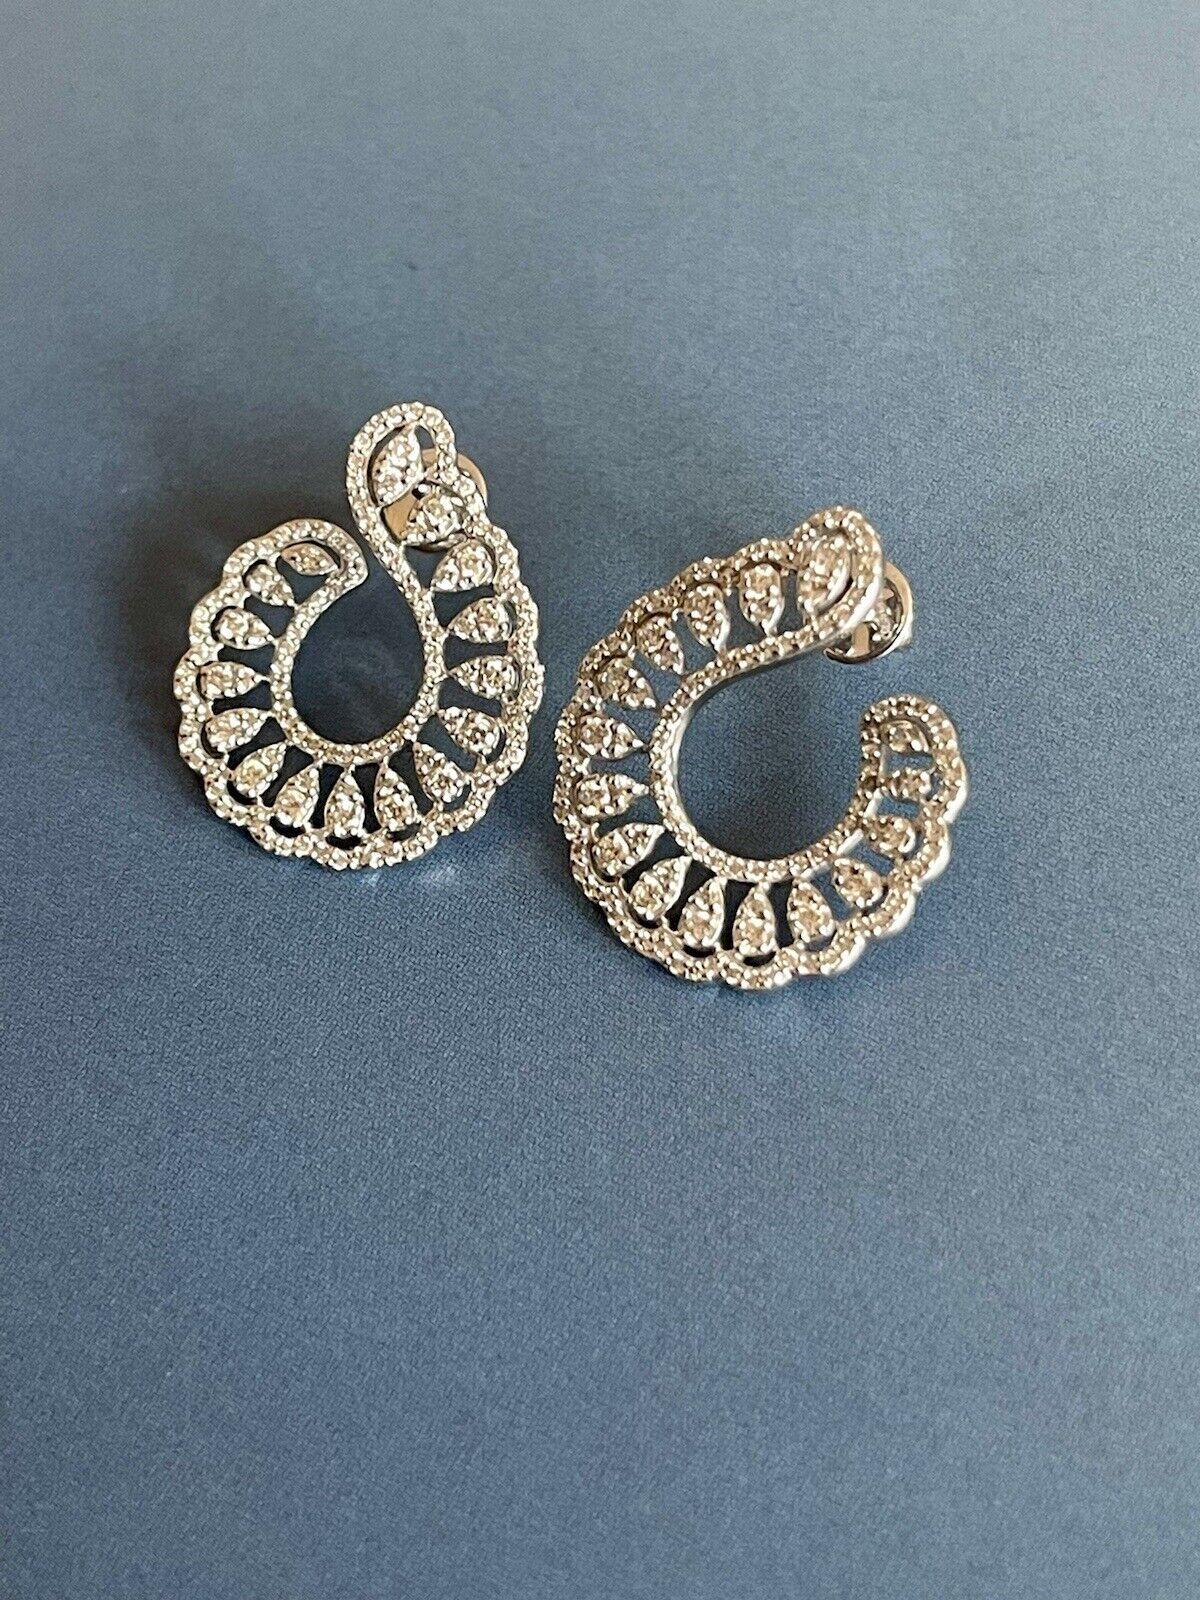 Magnificent piece of high jewellery from Switzerland on outlet price, only with us.

Truly stunning ear wrap Cannes red carpet style earring that will have many heads turning your way.

Cervin Blanc is Swiss luxury brand with presence in most